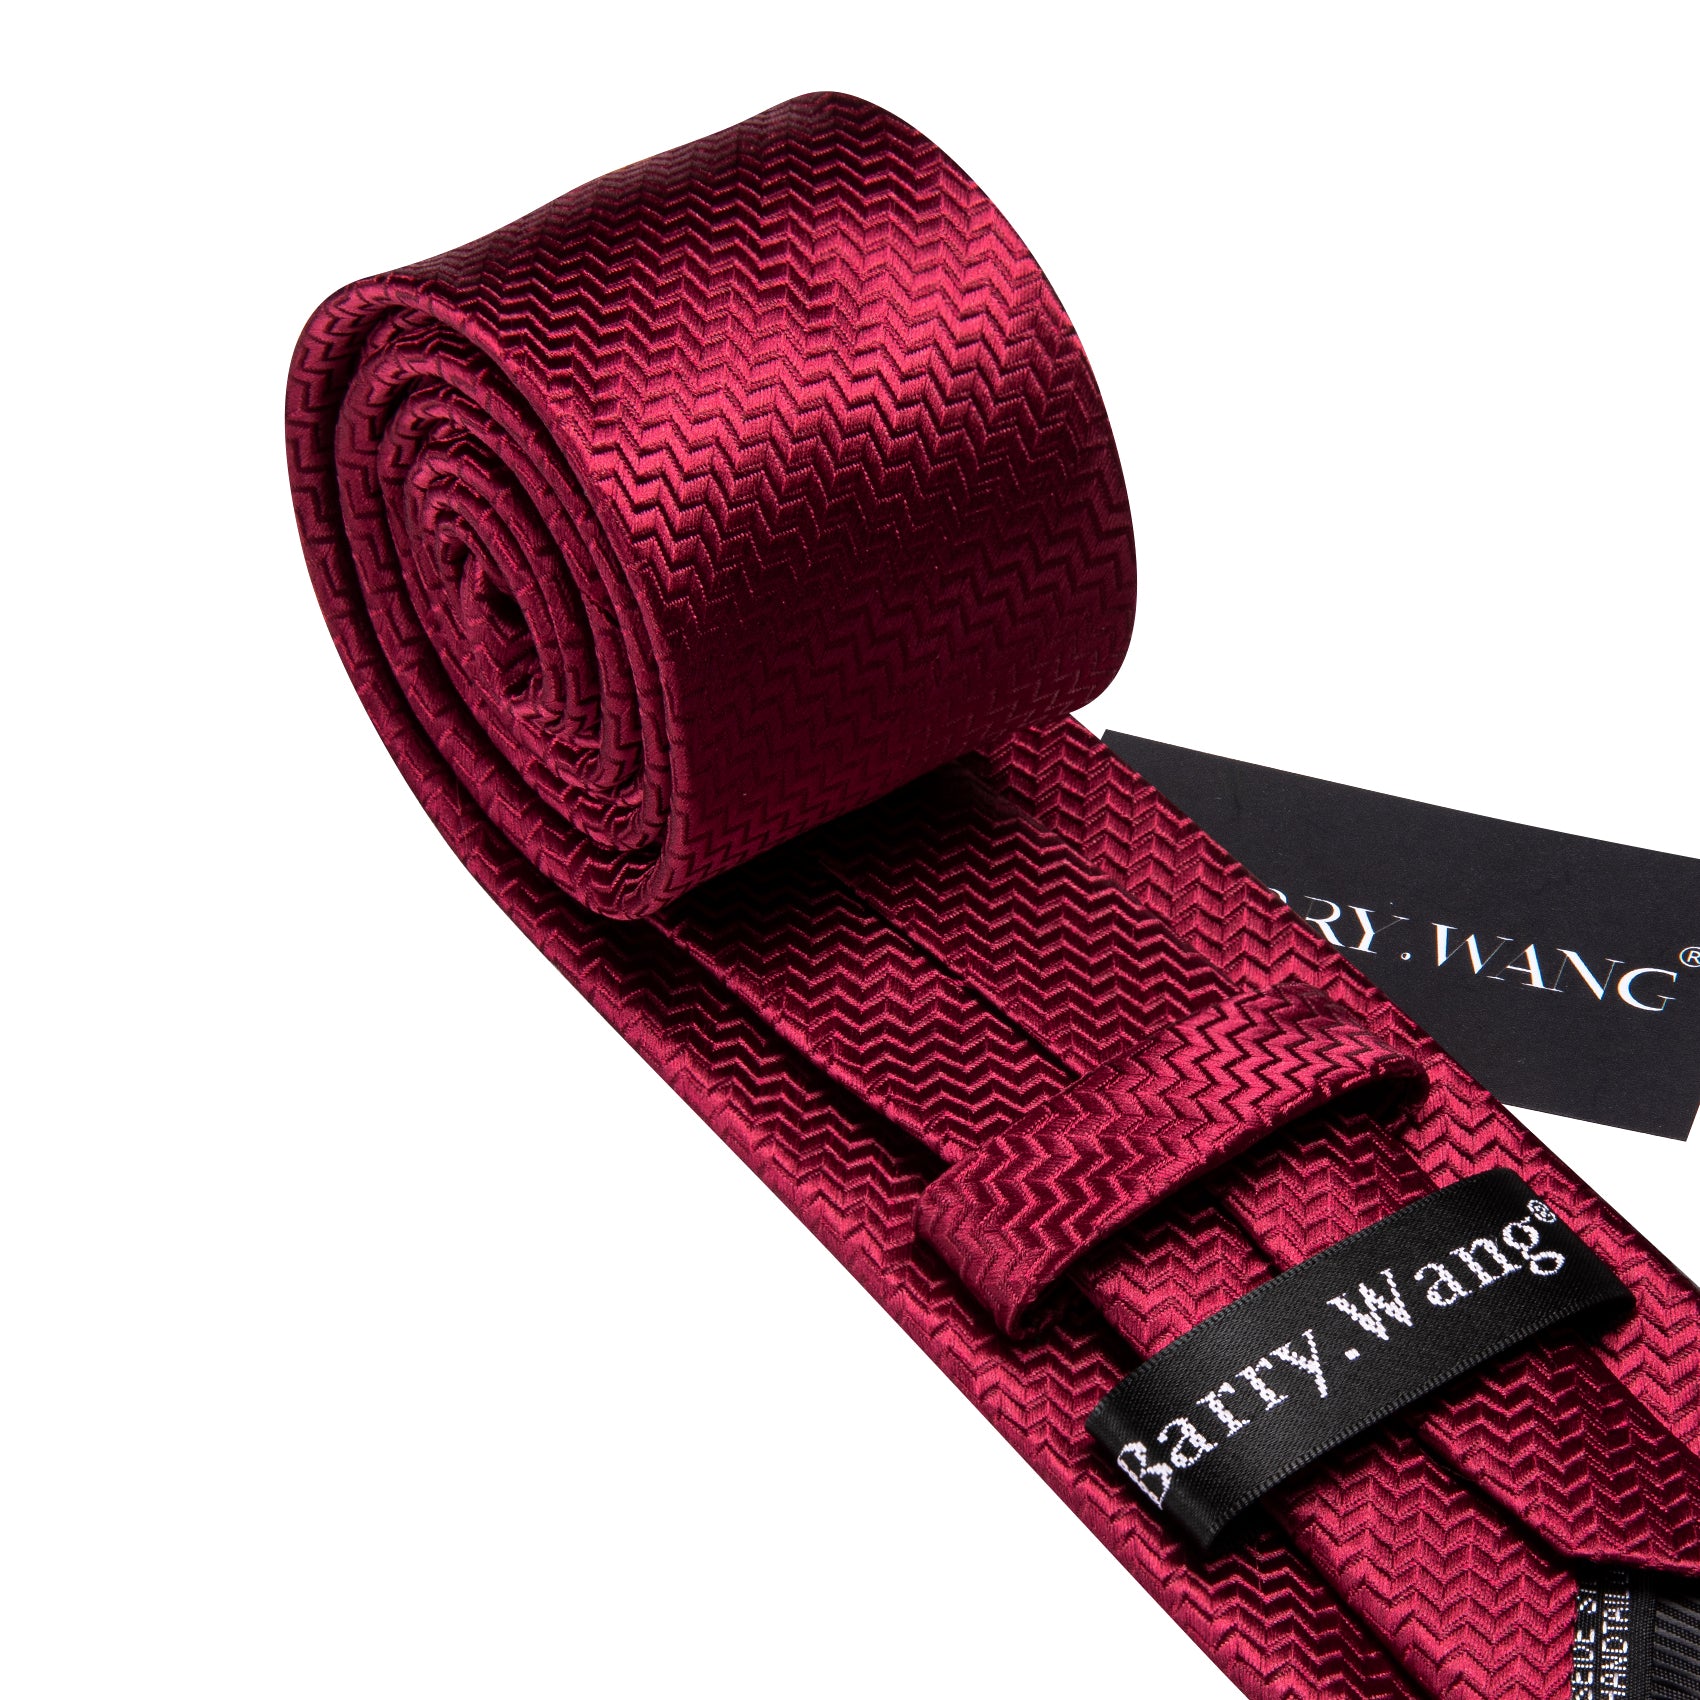 Burgundy Red Silk 63 Inches Extra Long Tie Pocket Square Cufflinks Set